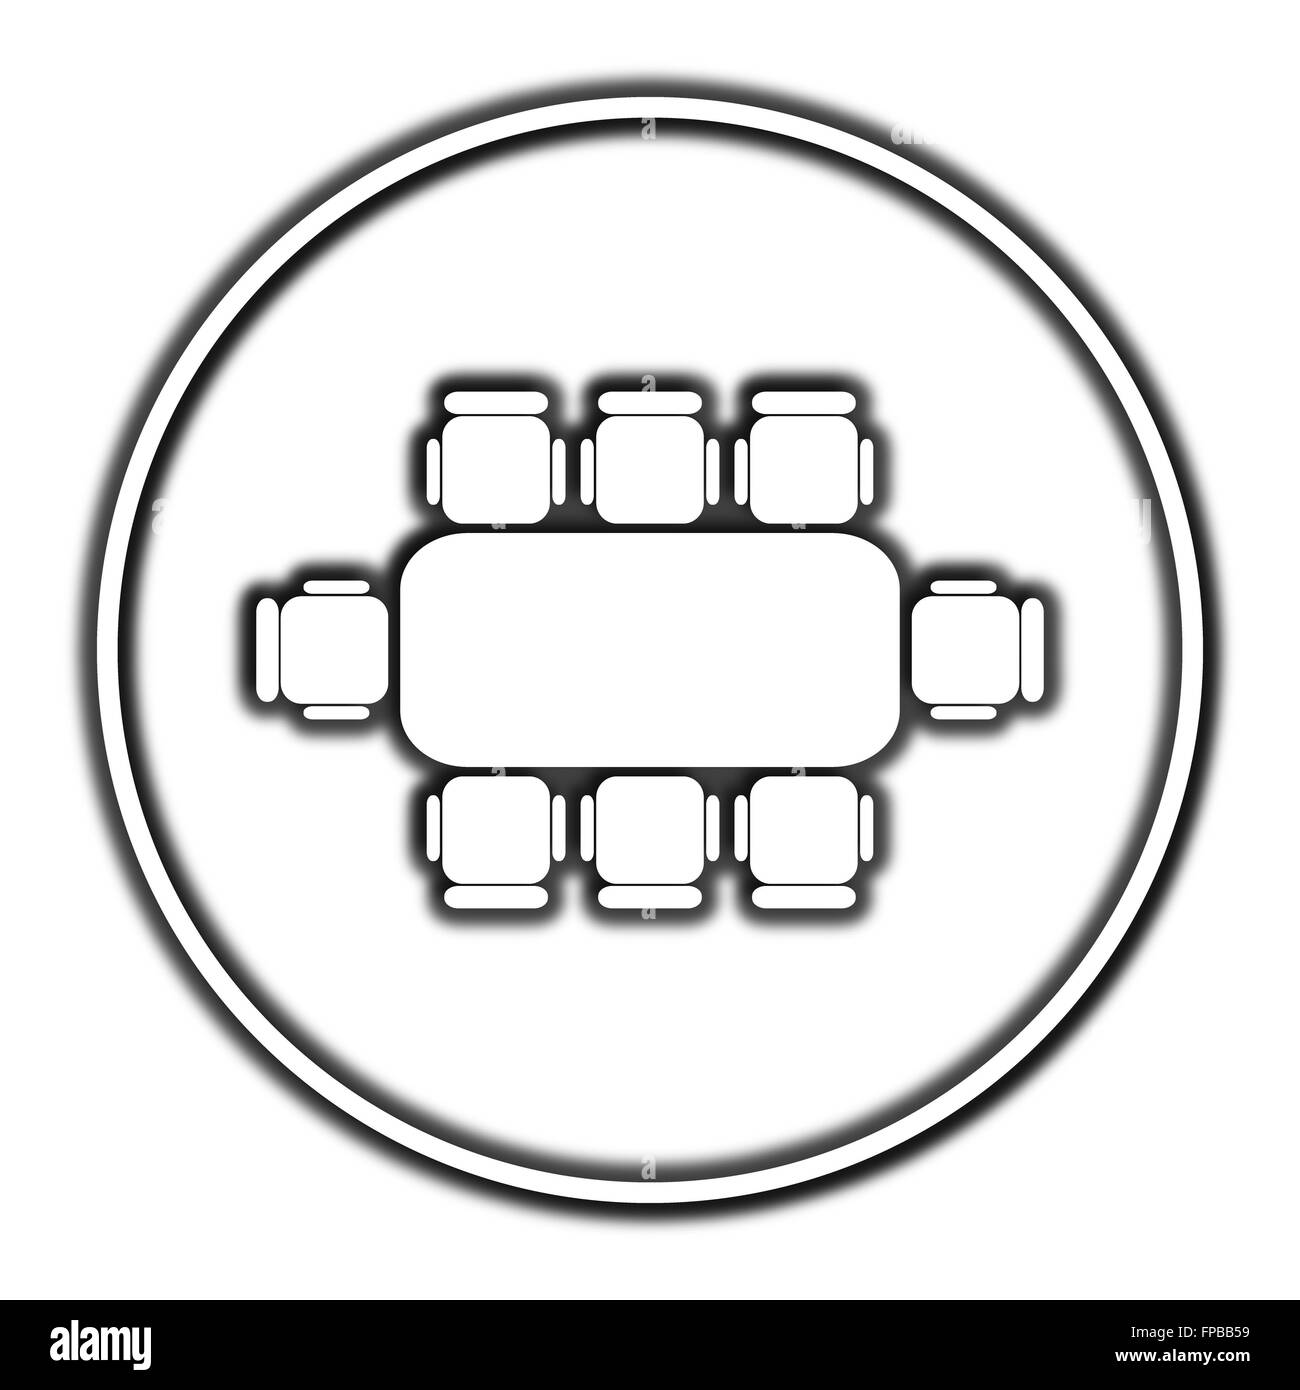 Business meeting table icon. Internet button on white background. Stock Photo